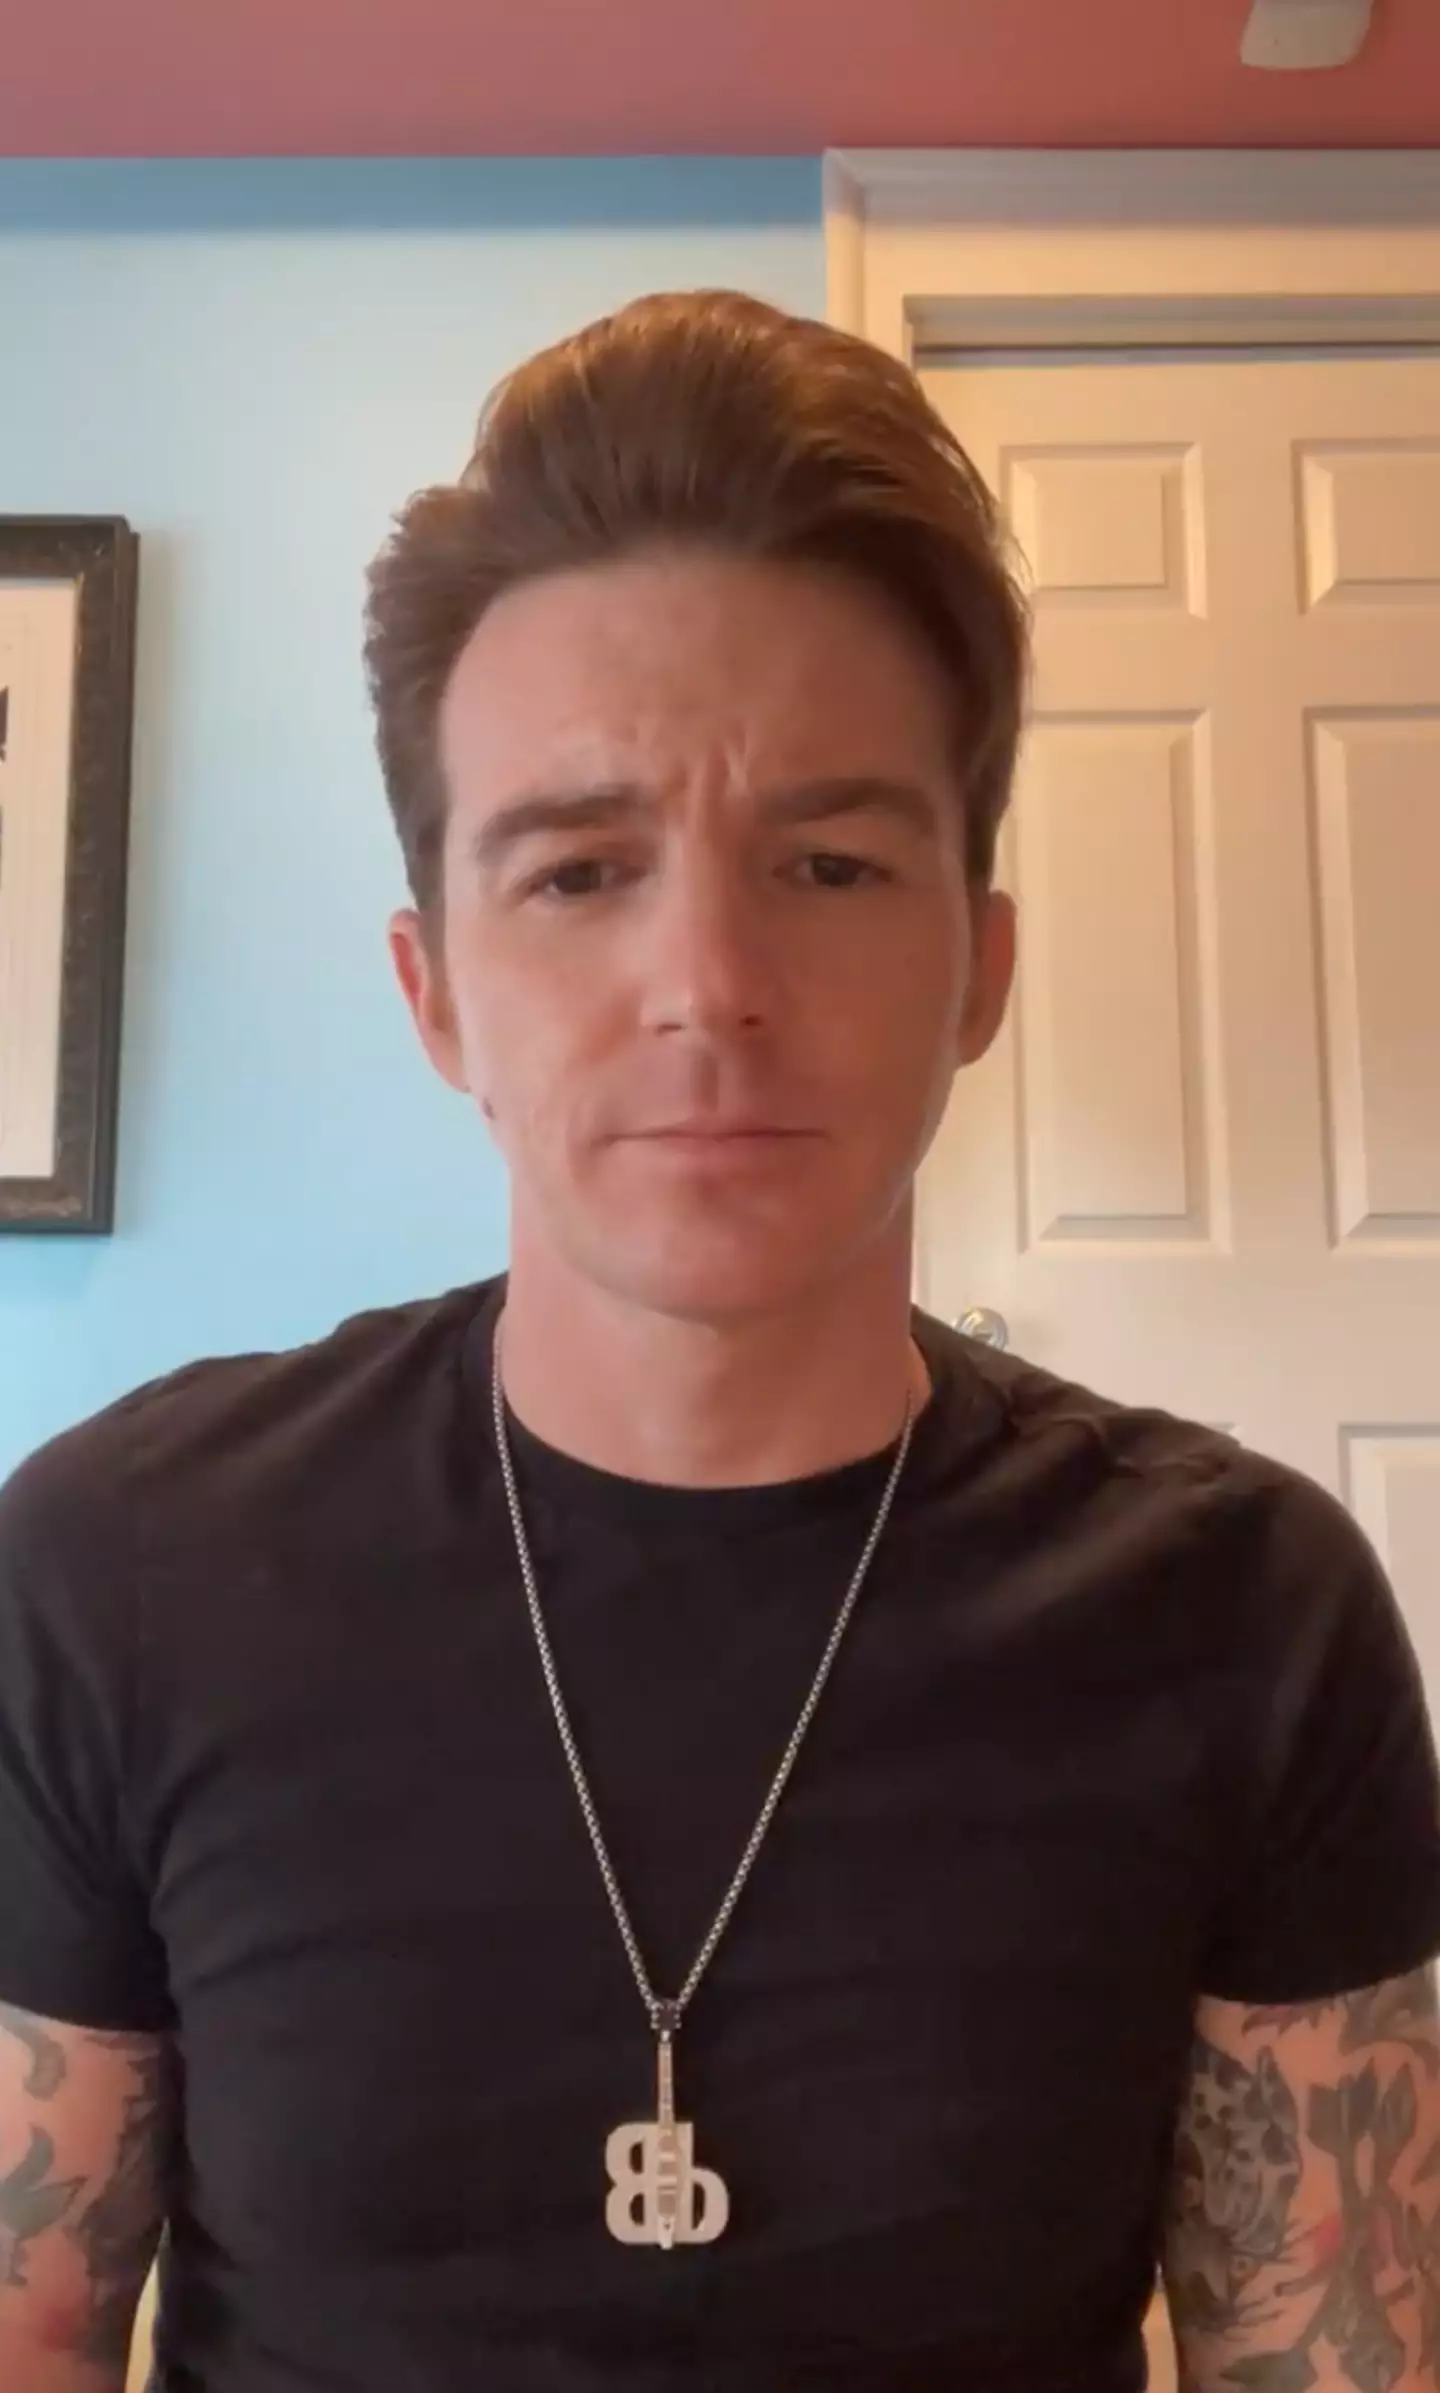 Drake Bell's whereabouts are currently unknown.